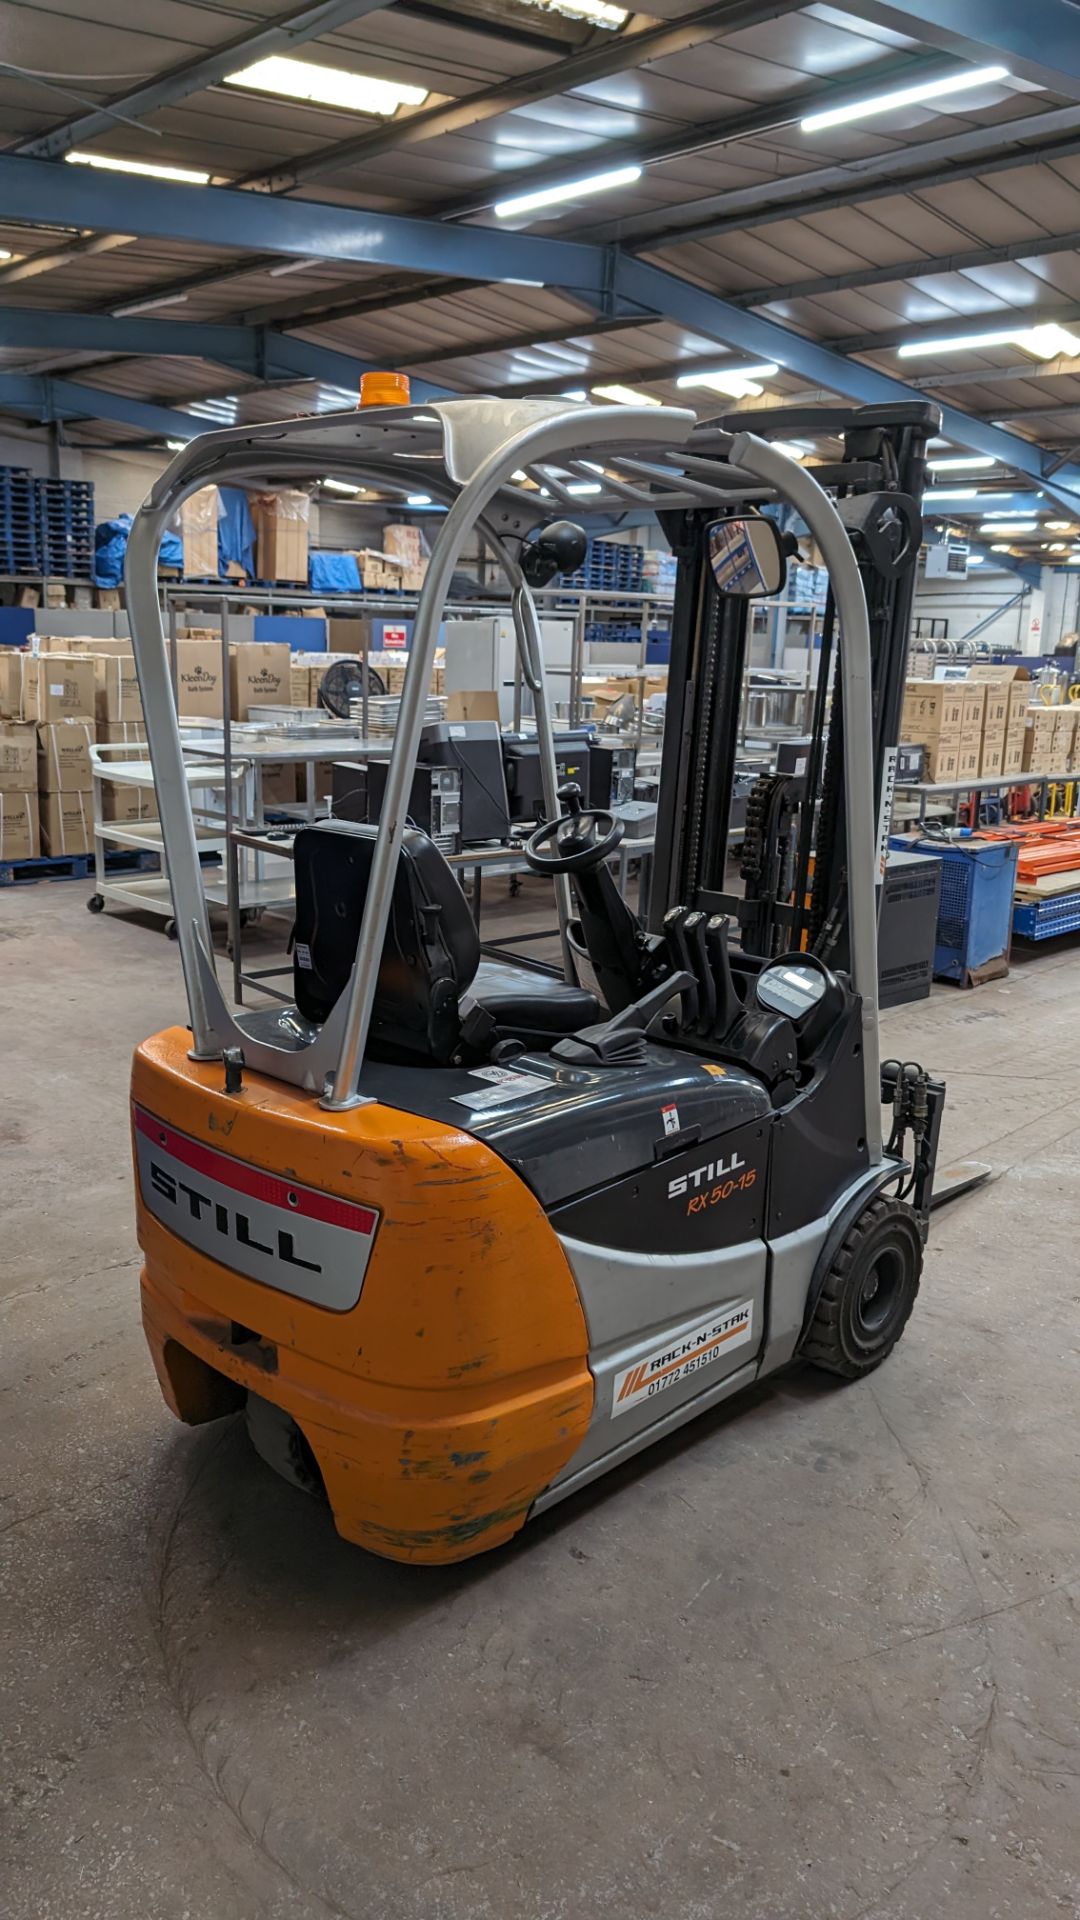 Still model RX-5015 3-wheel electric forklift truck with sideshift, 1.5 tonne capacity, including St - Bild 16 aus 18